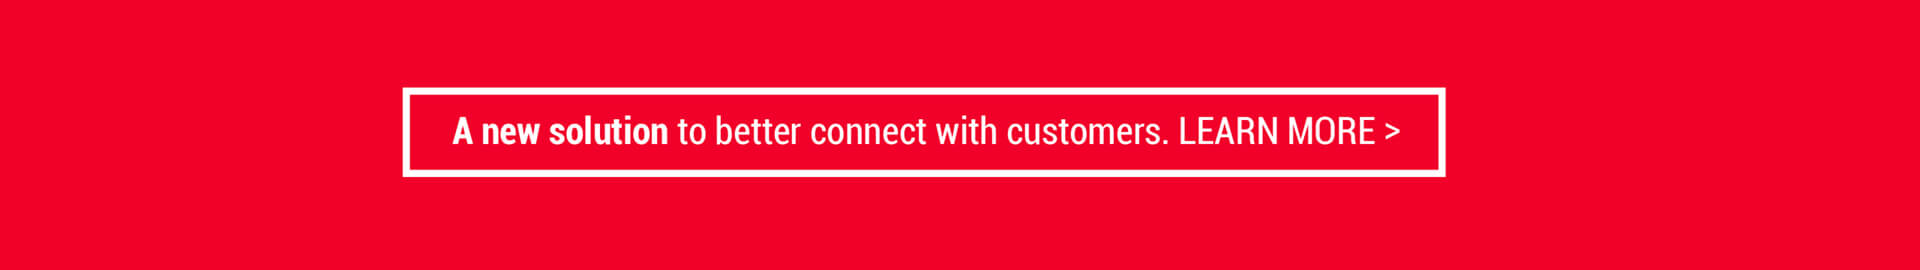 A new solution to better connect with customers